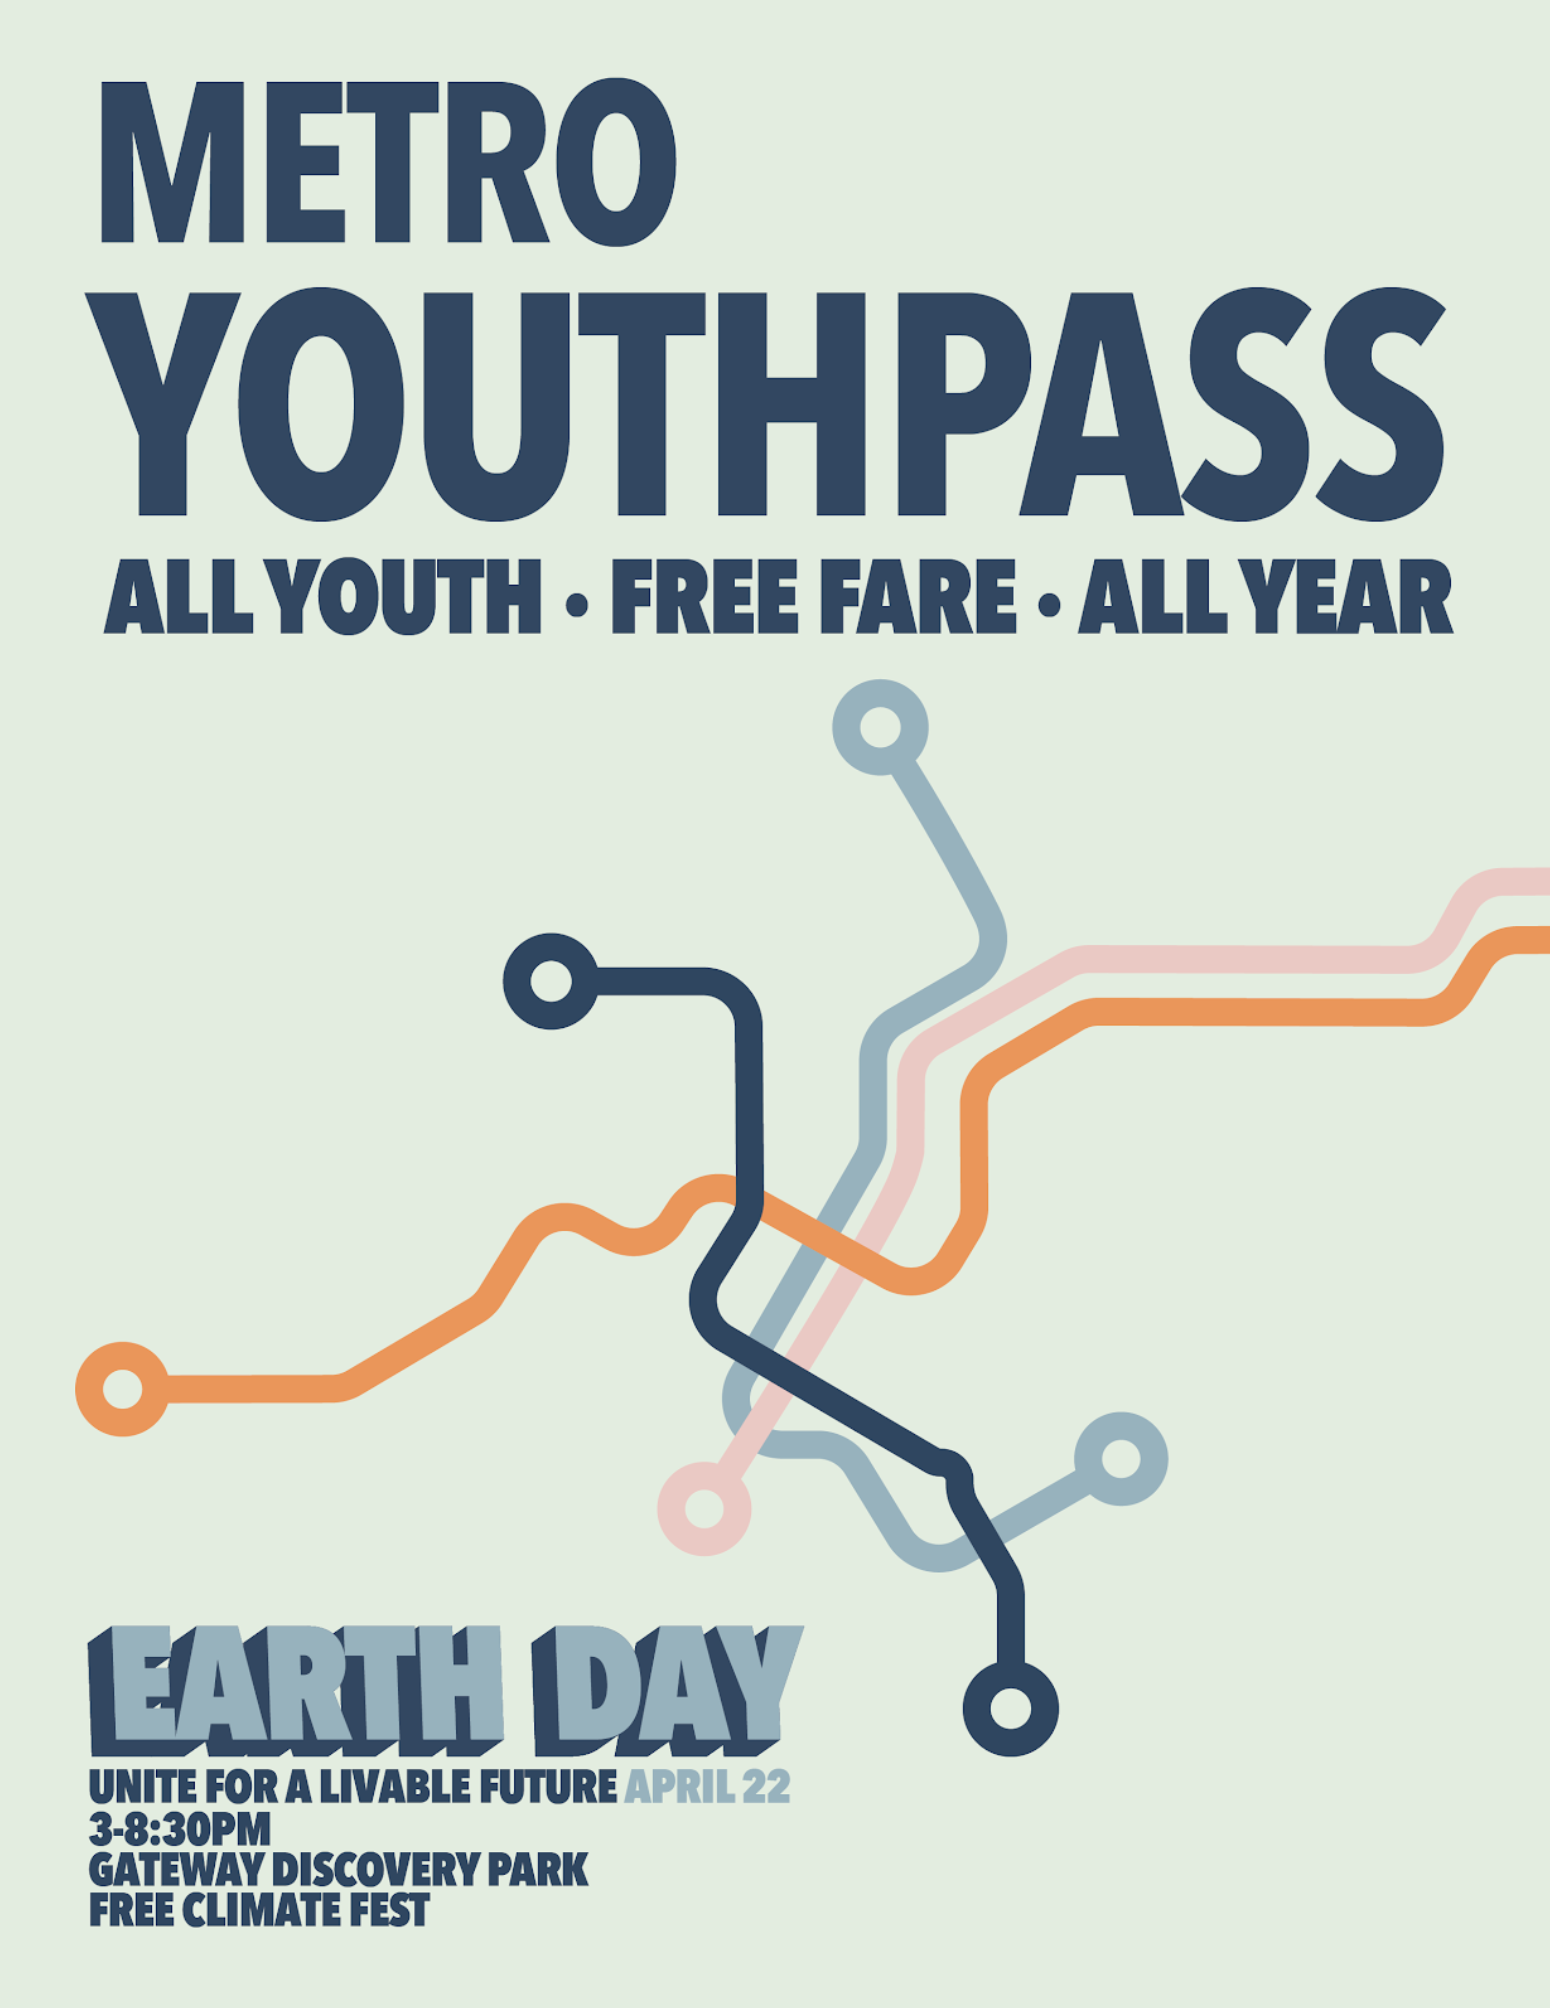 Earth Day 2020 Posters (Co-designed with Sam Richins)